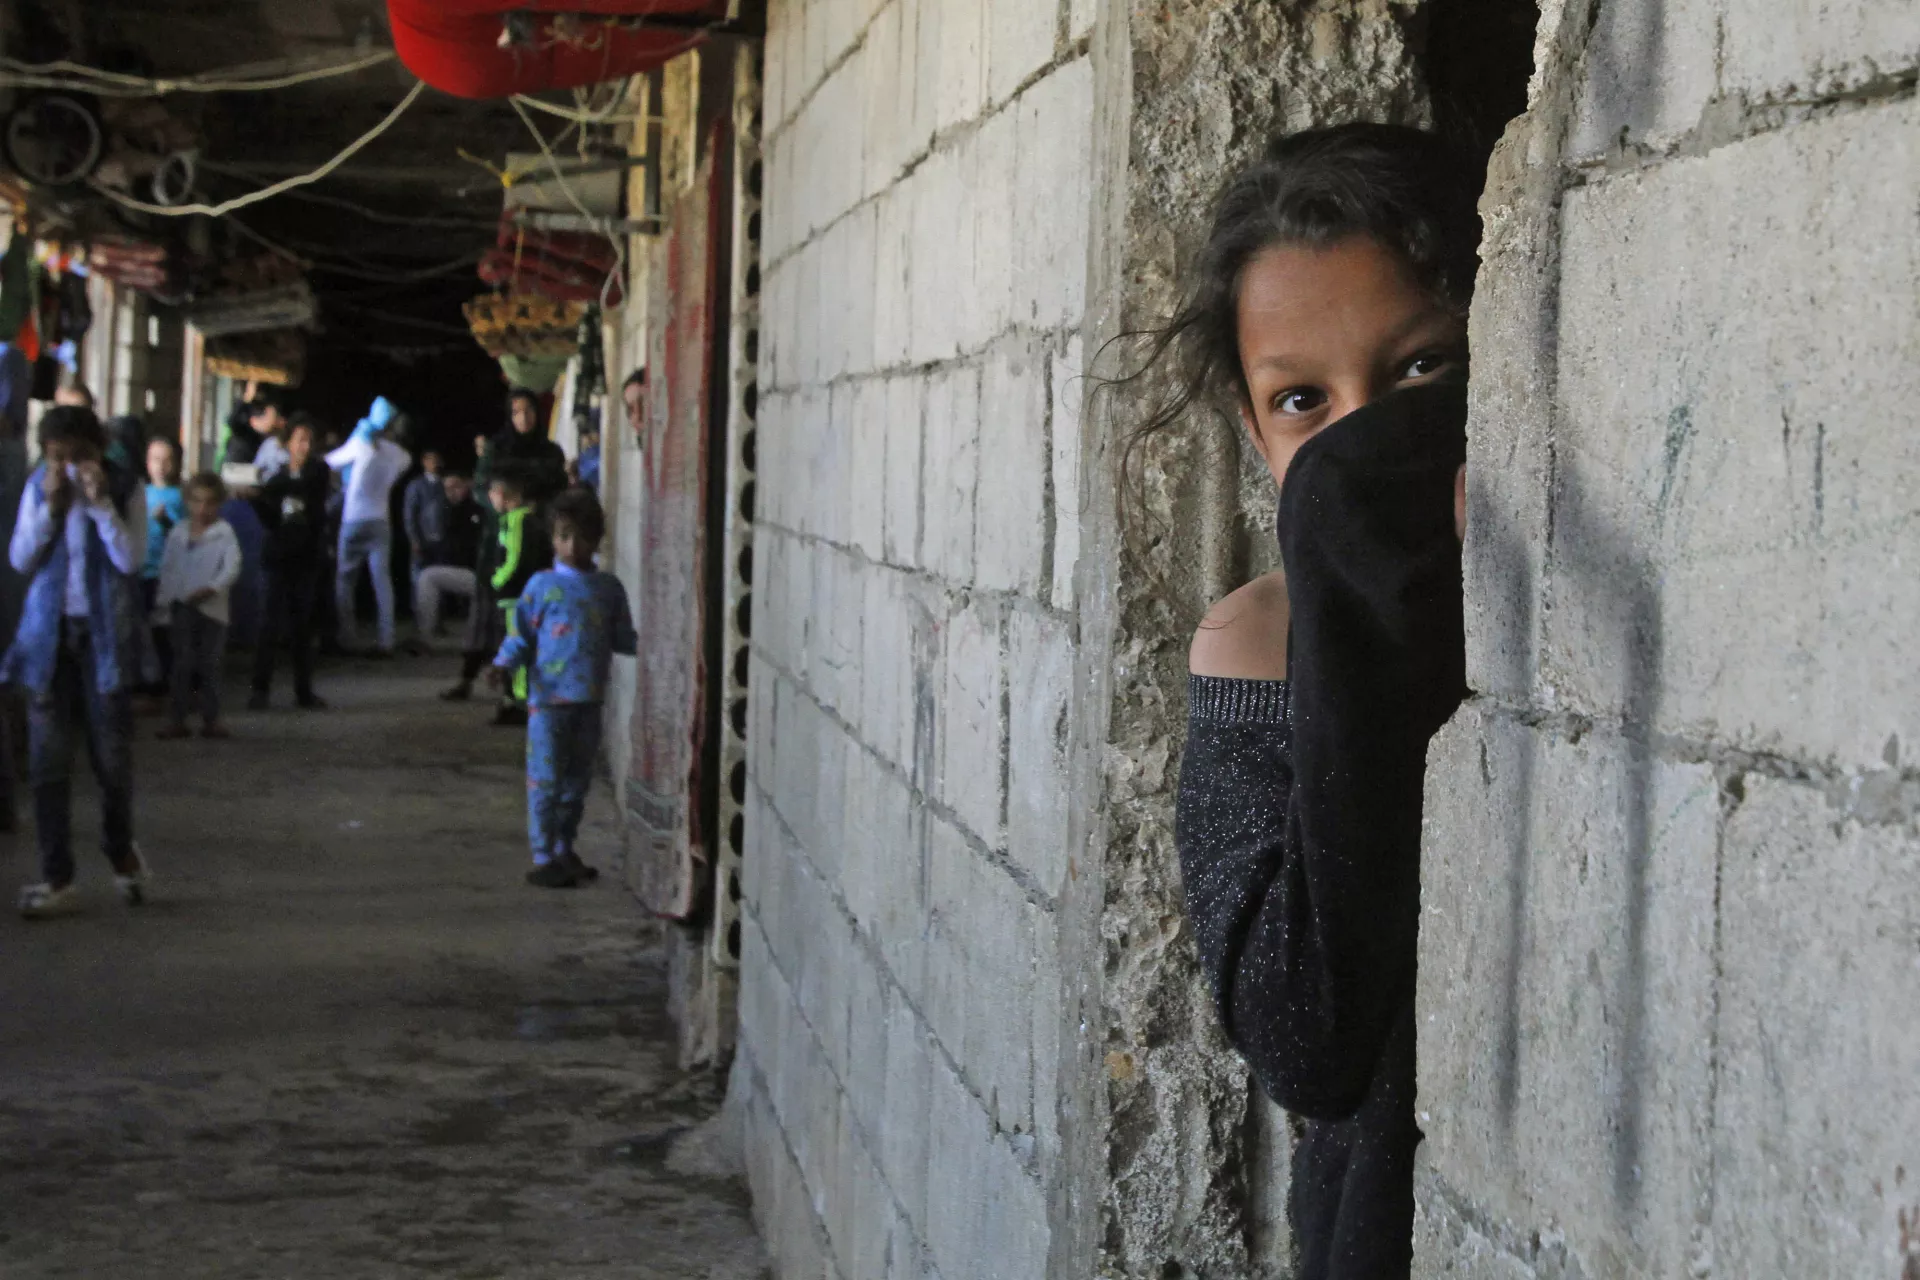 Lebanon. A Syrian refugee looks out of a doorway.